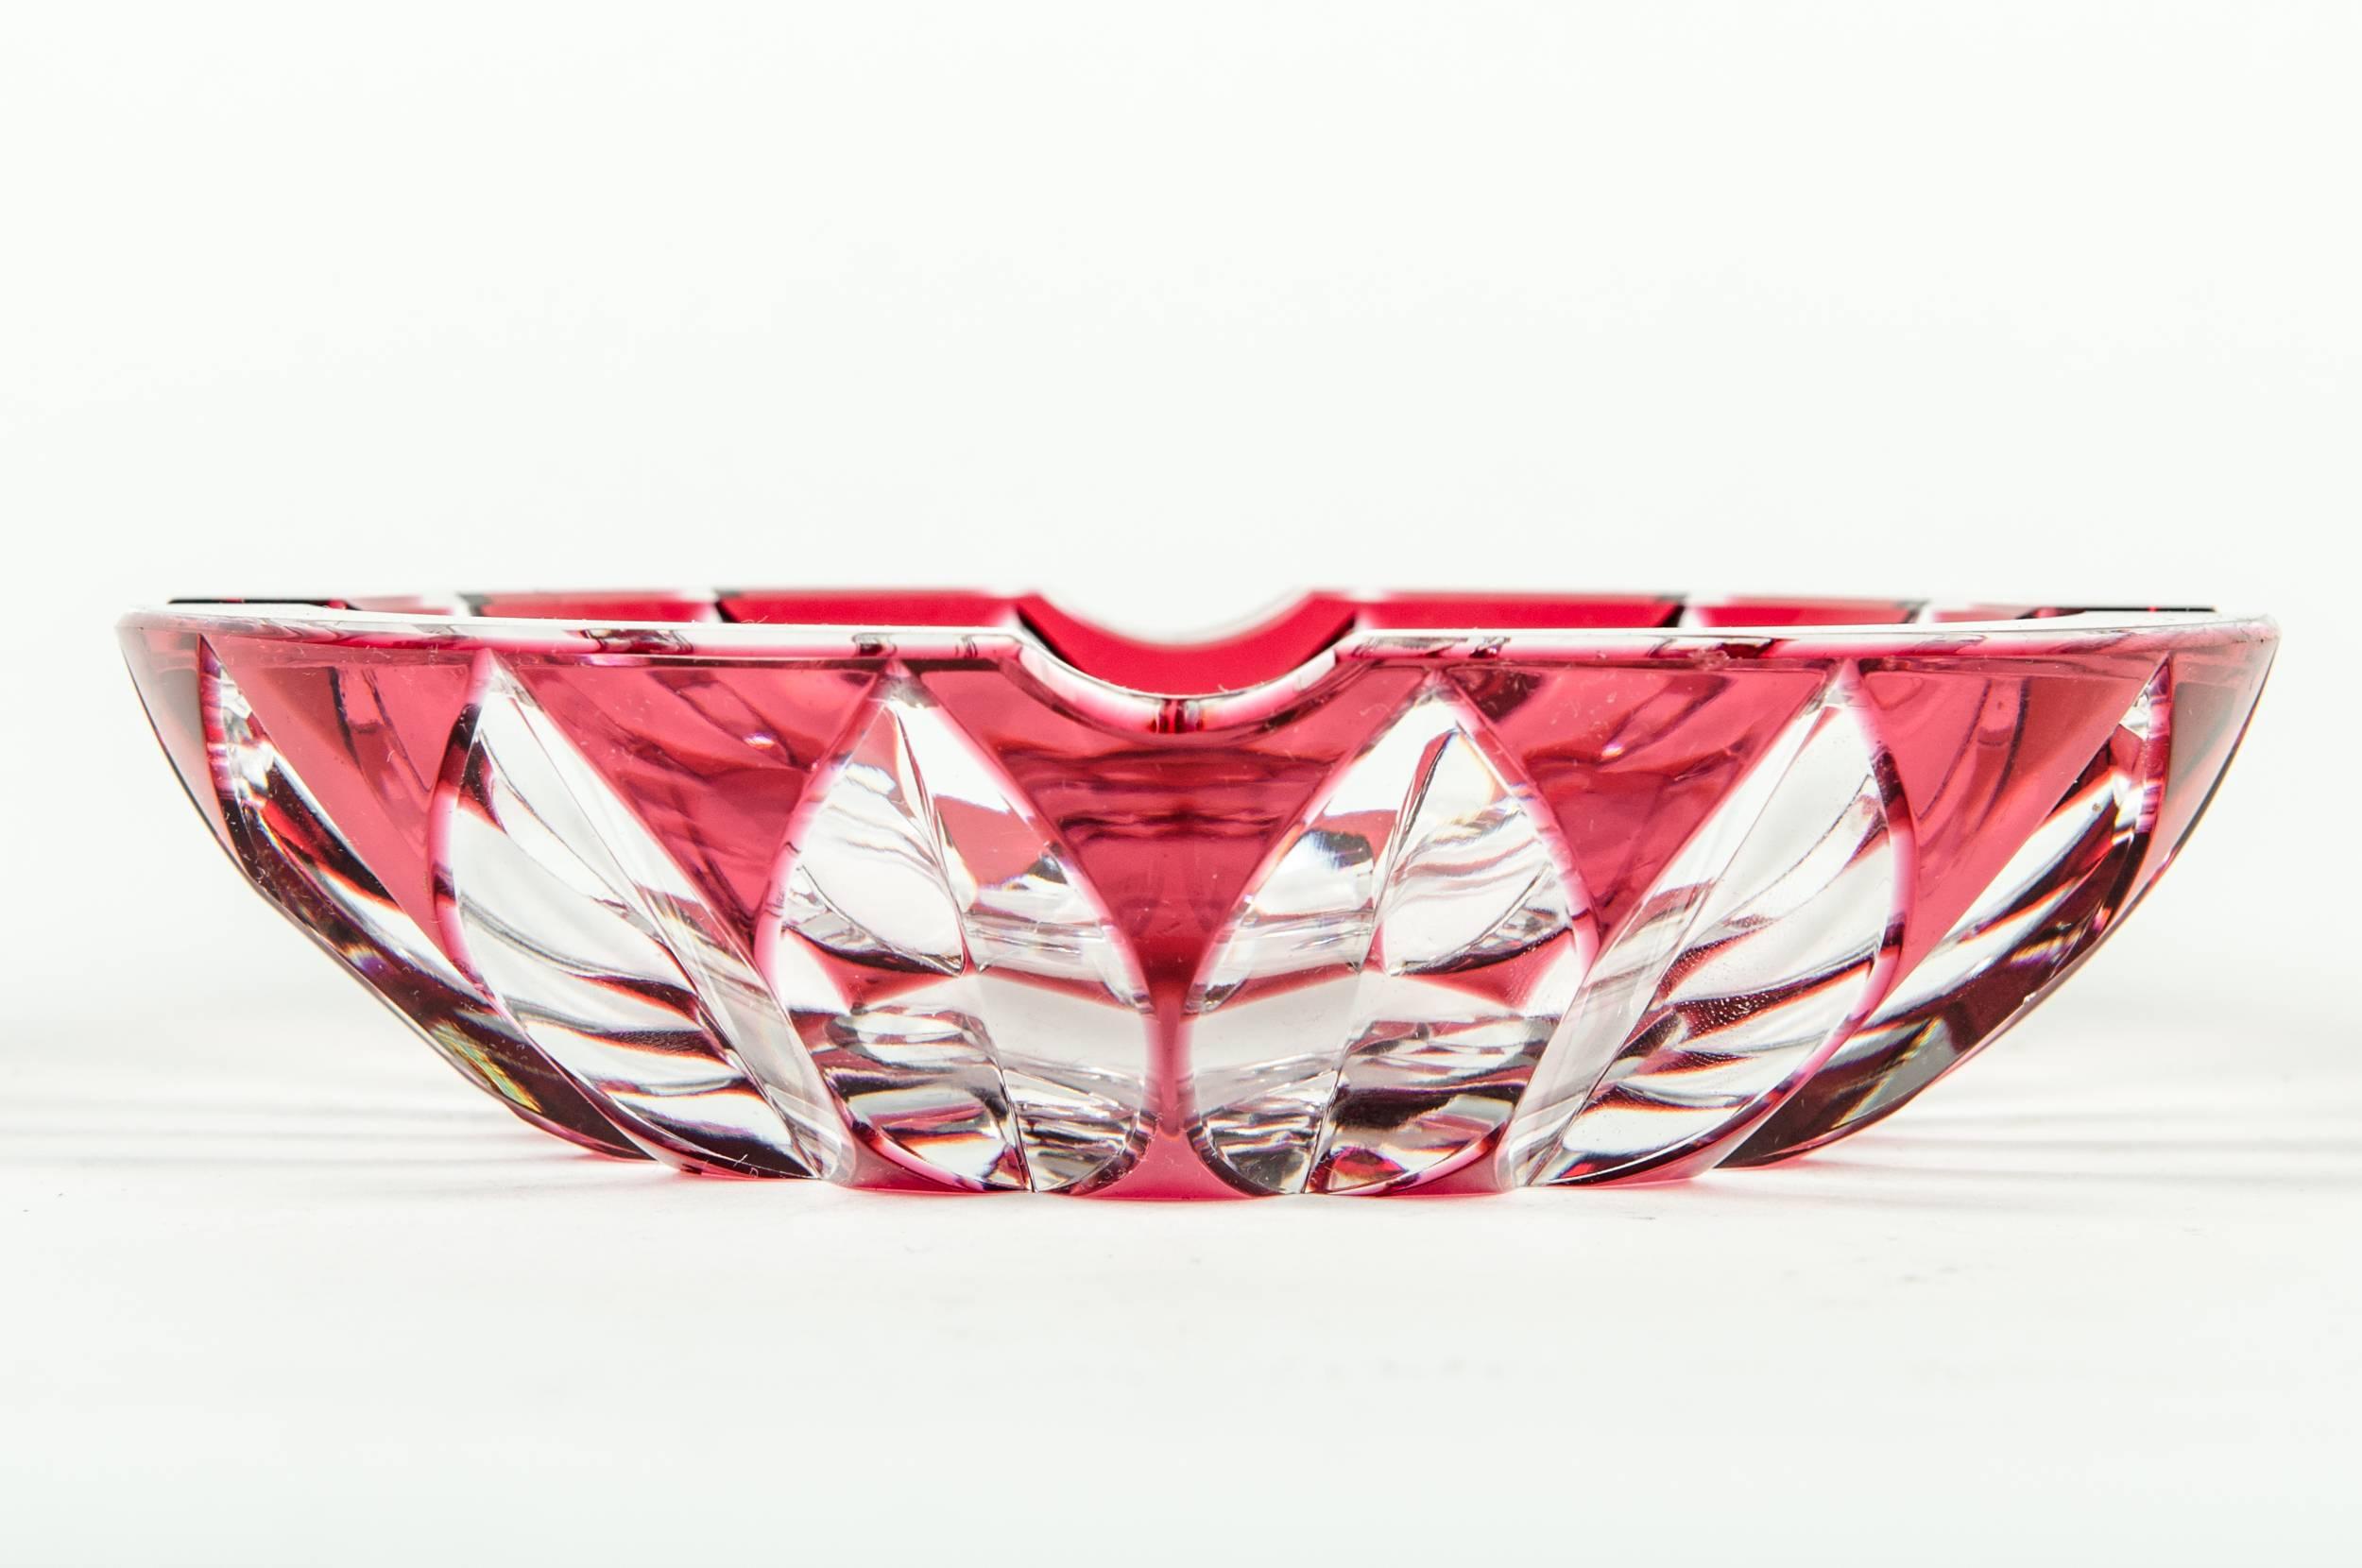 Vintage Saint Louis cut crystal cranberry ash tray. The ash tray measure 7 inches in diameter.